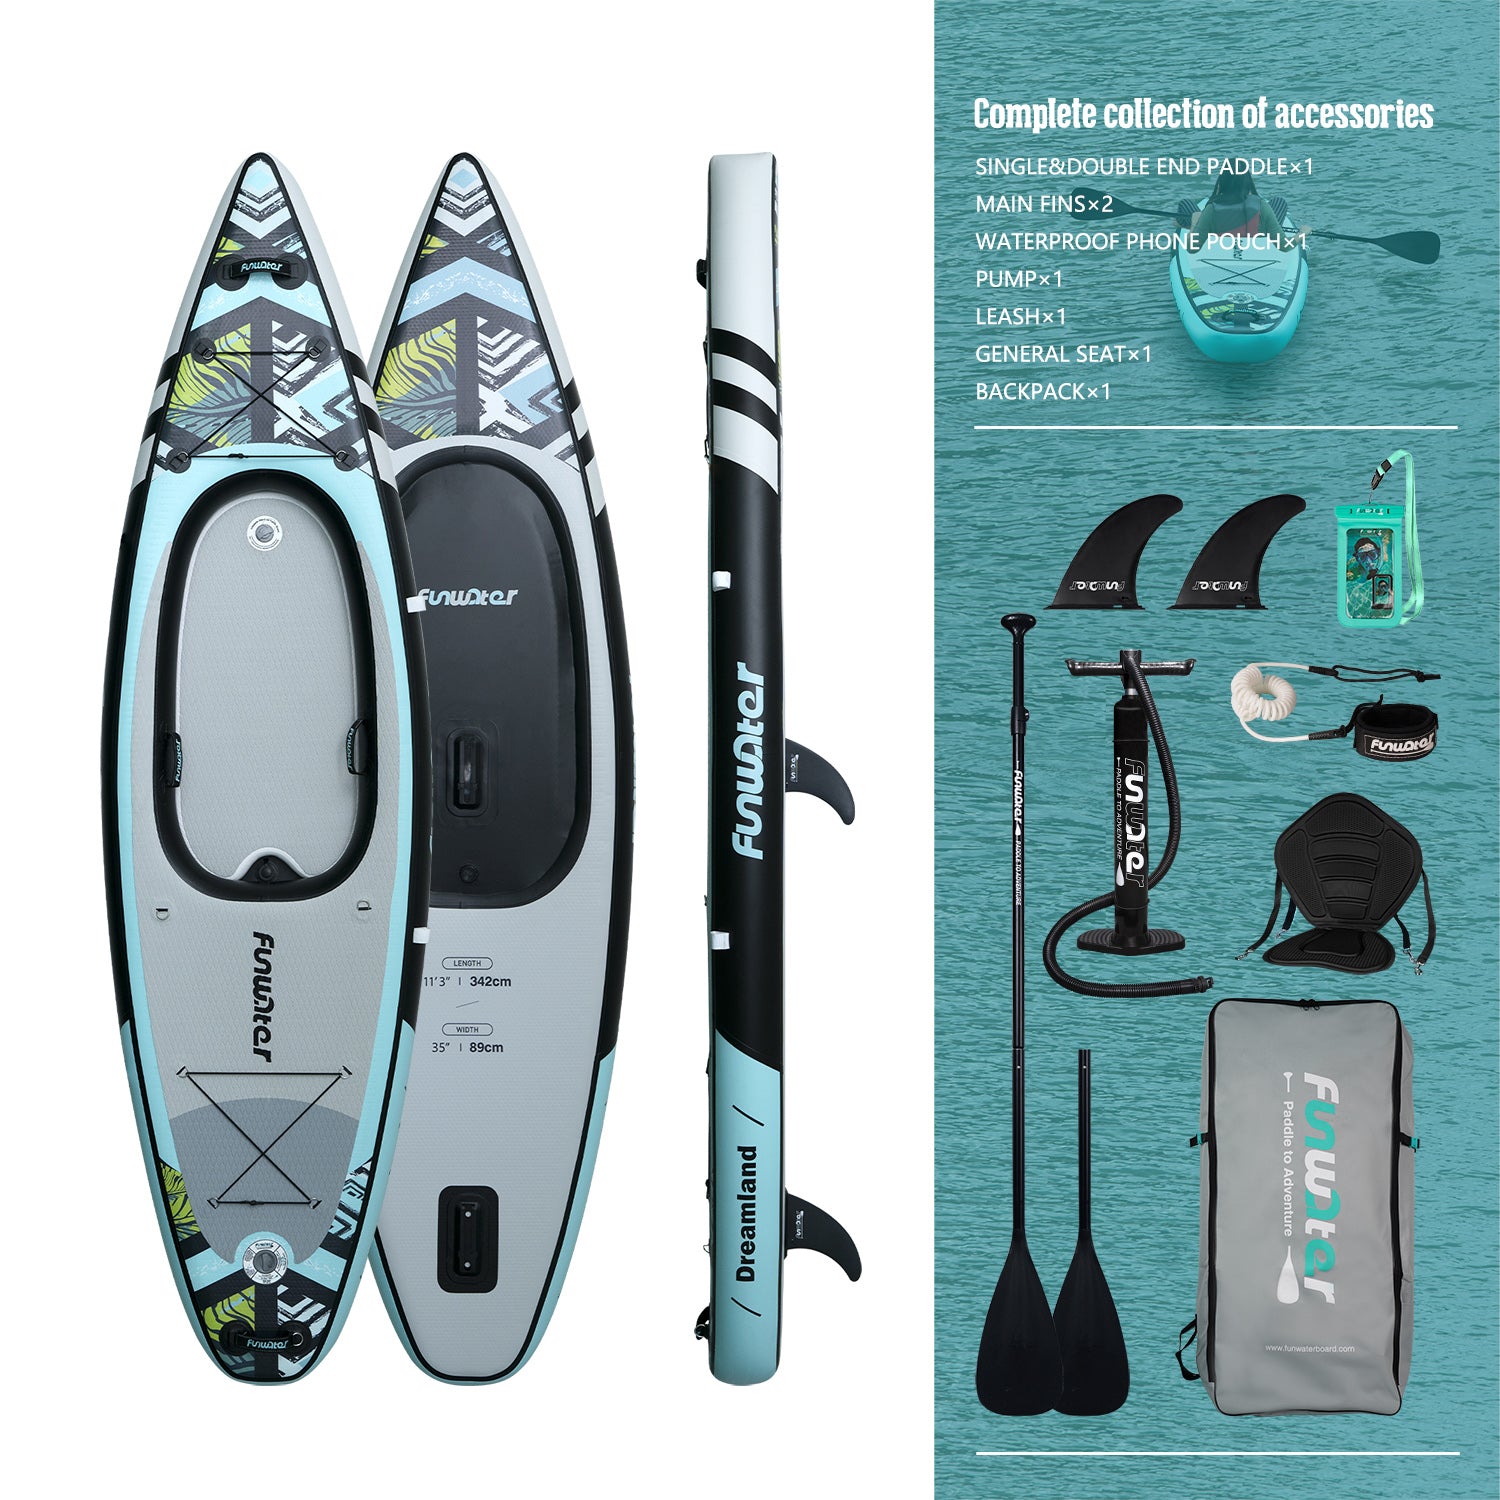 DREAMLAND 11'3" INFLATABLE KAYAK and accessories